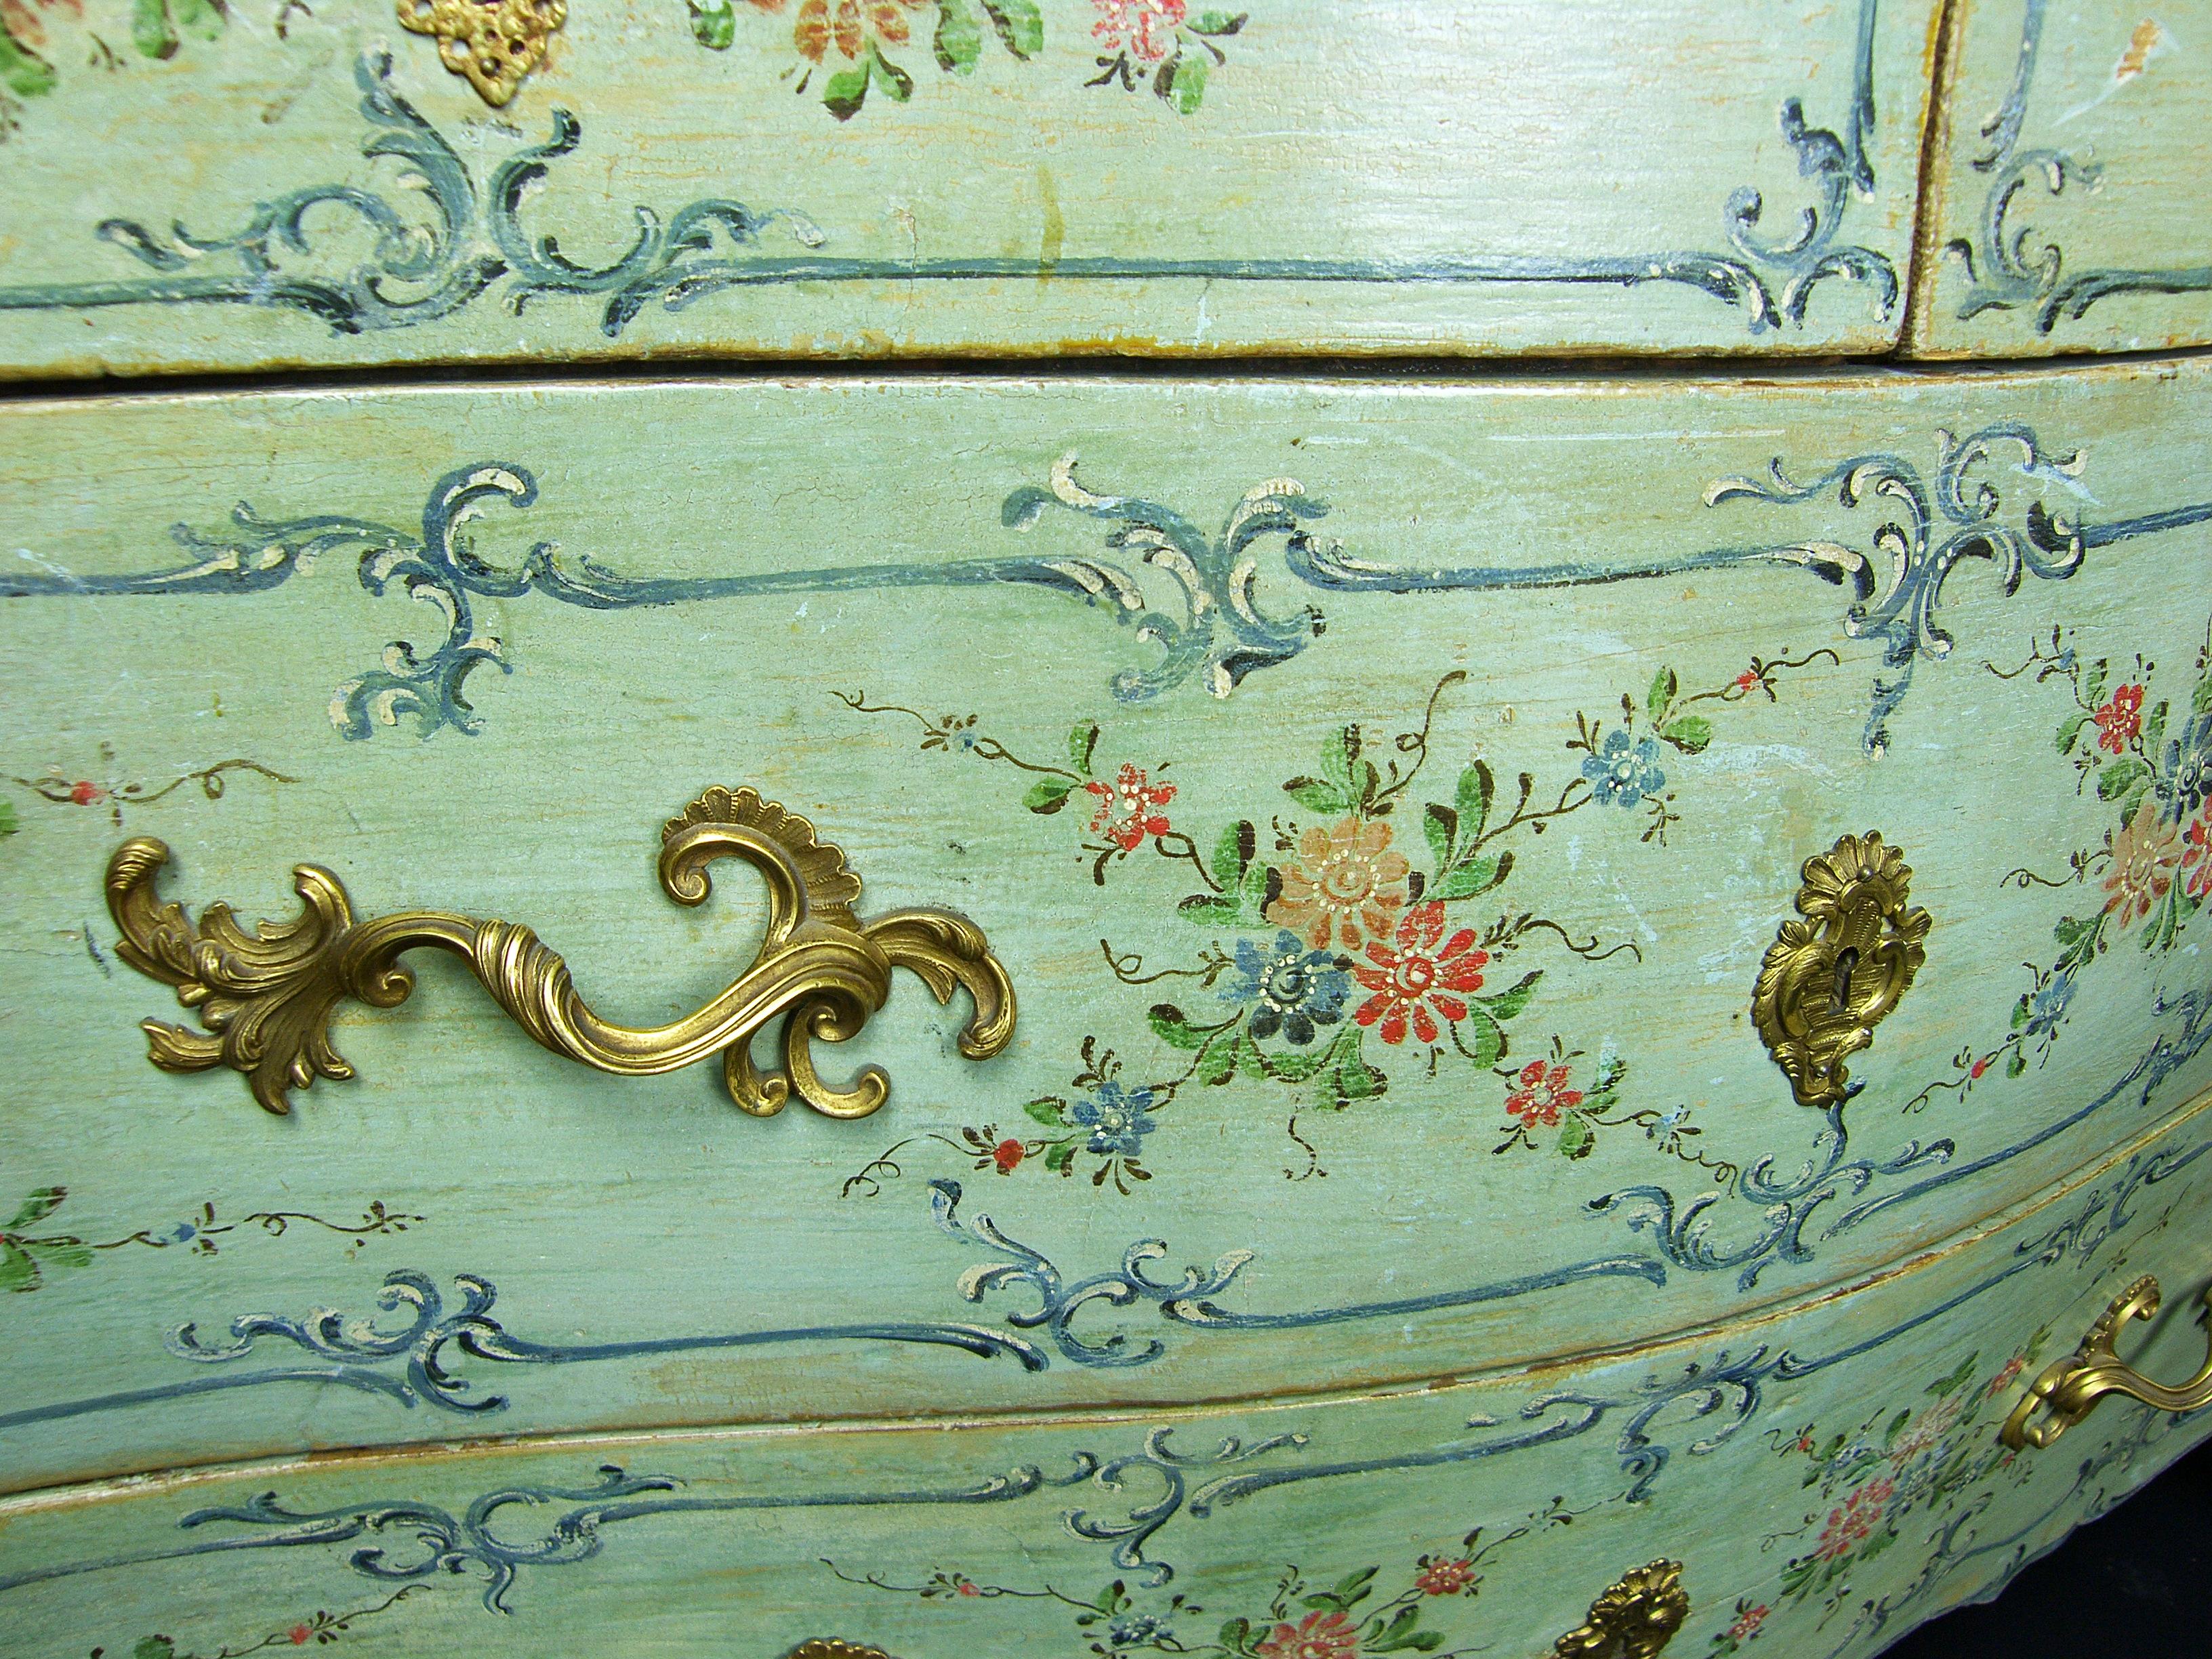 18th Century Italian Polychrome Lacquered Wooden Dresser with Floral Decorations 8